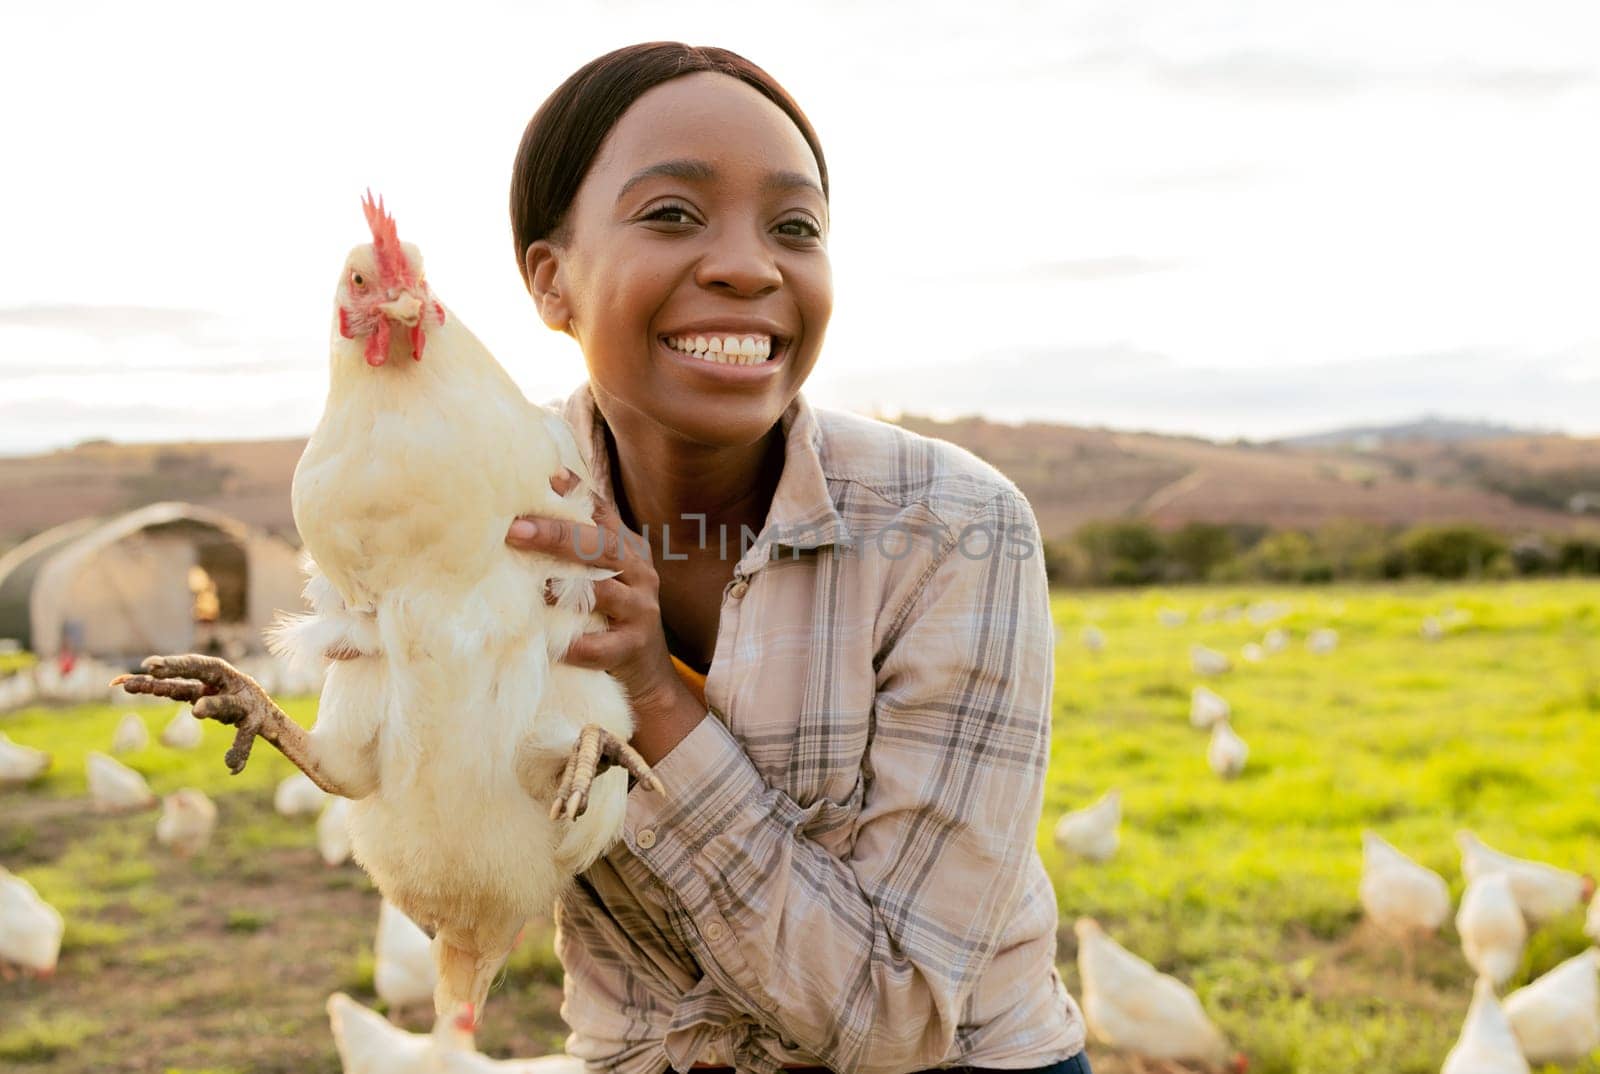 Chicken, farmer and smile in animal farming, agriculture and startup business outdoor in South Africa. Portrait, black woman and happy while working with animals on poultry farm with countryside life by YuriArcurs